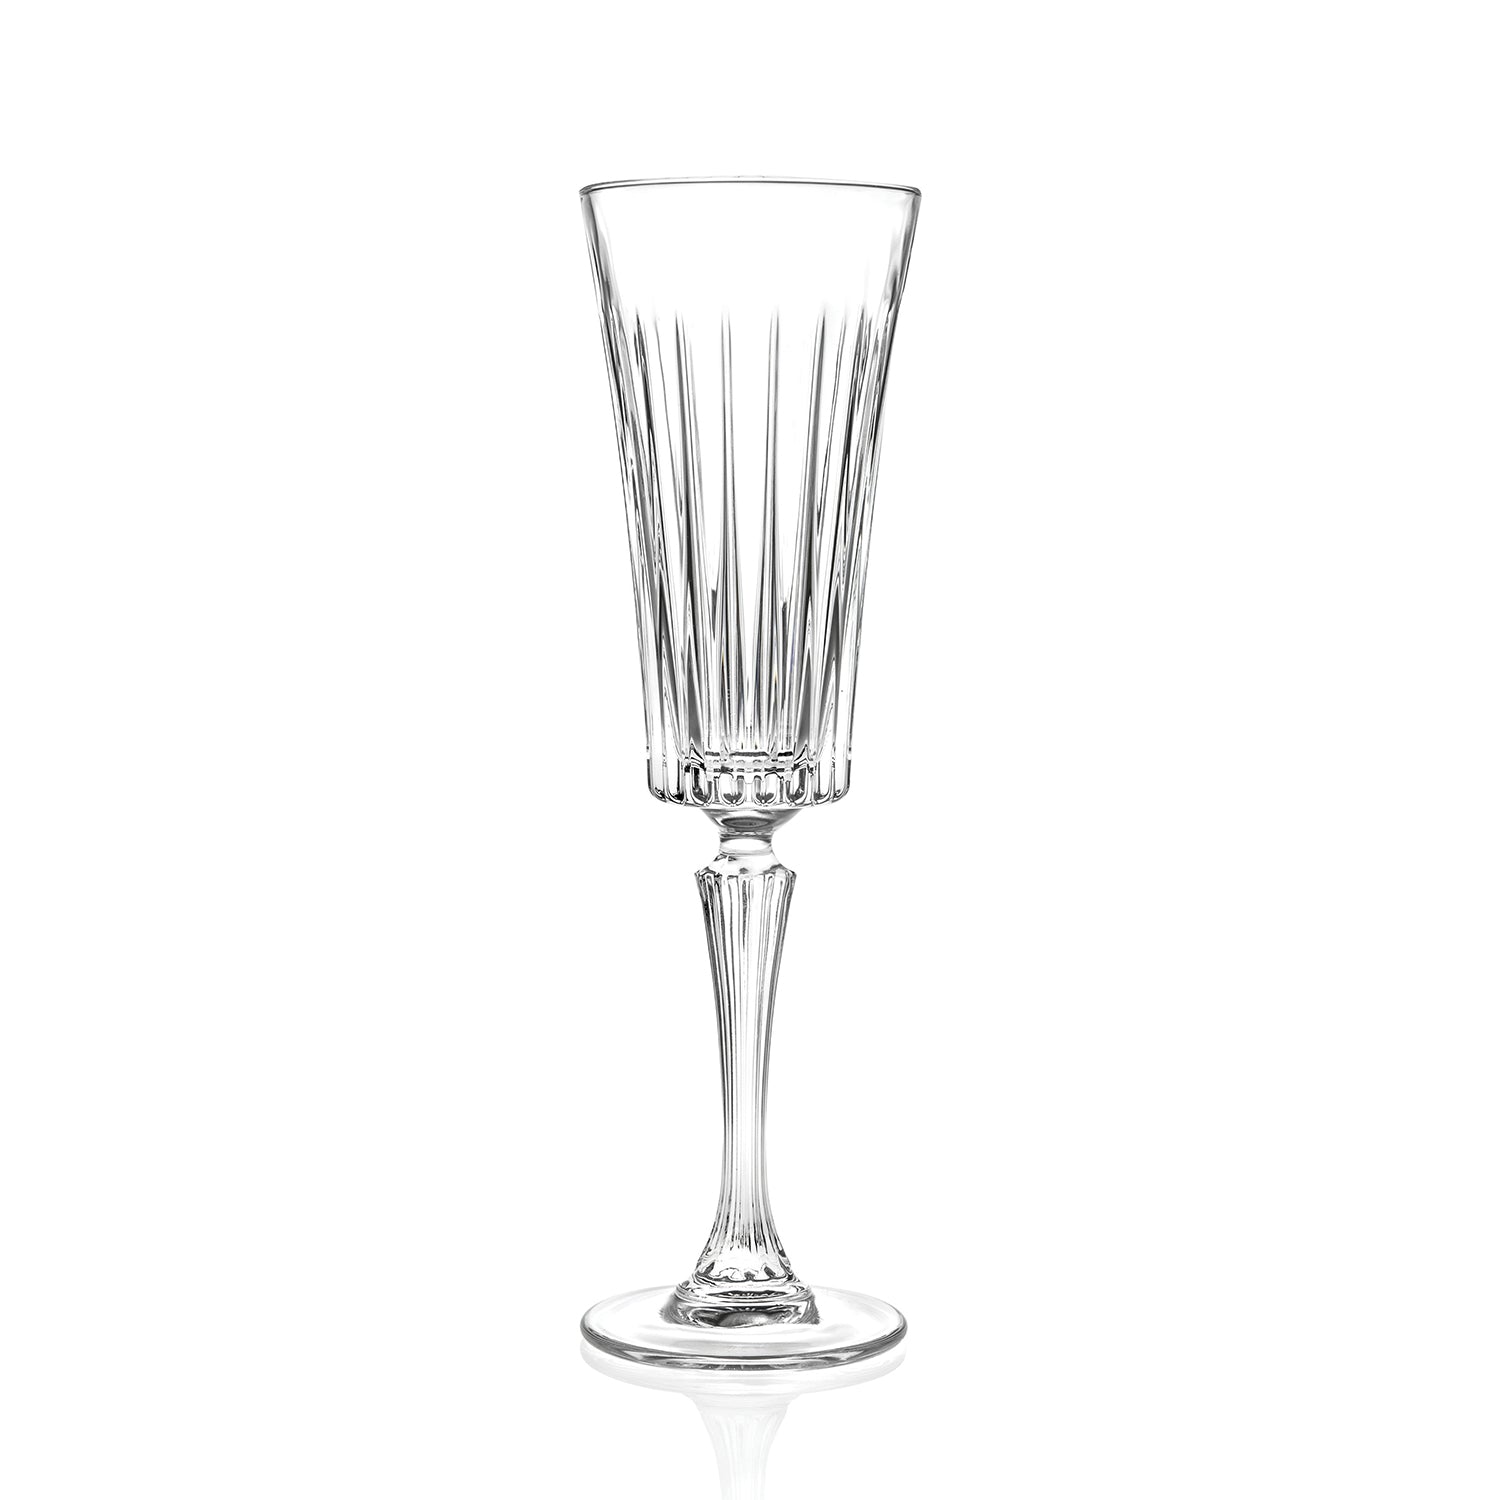 RCR (Made in Italy) Timeless Flute Champagne Goblet Glasses, 210 ml, Set of 6